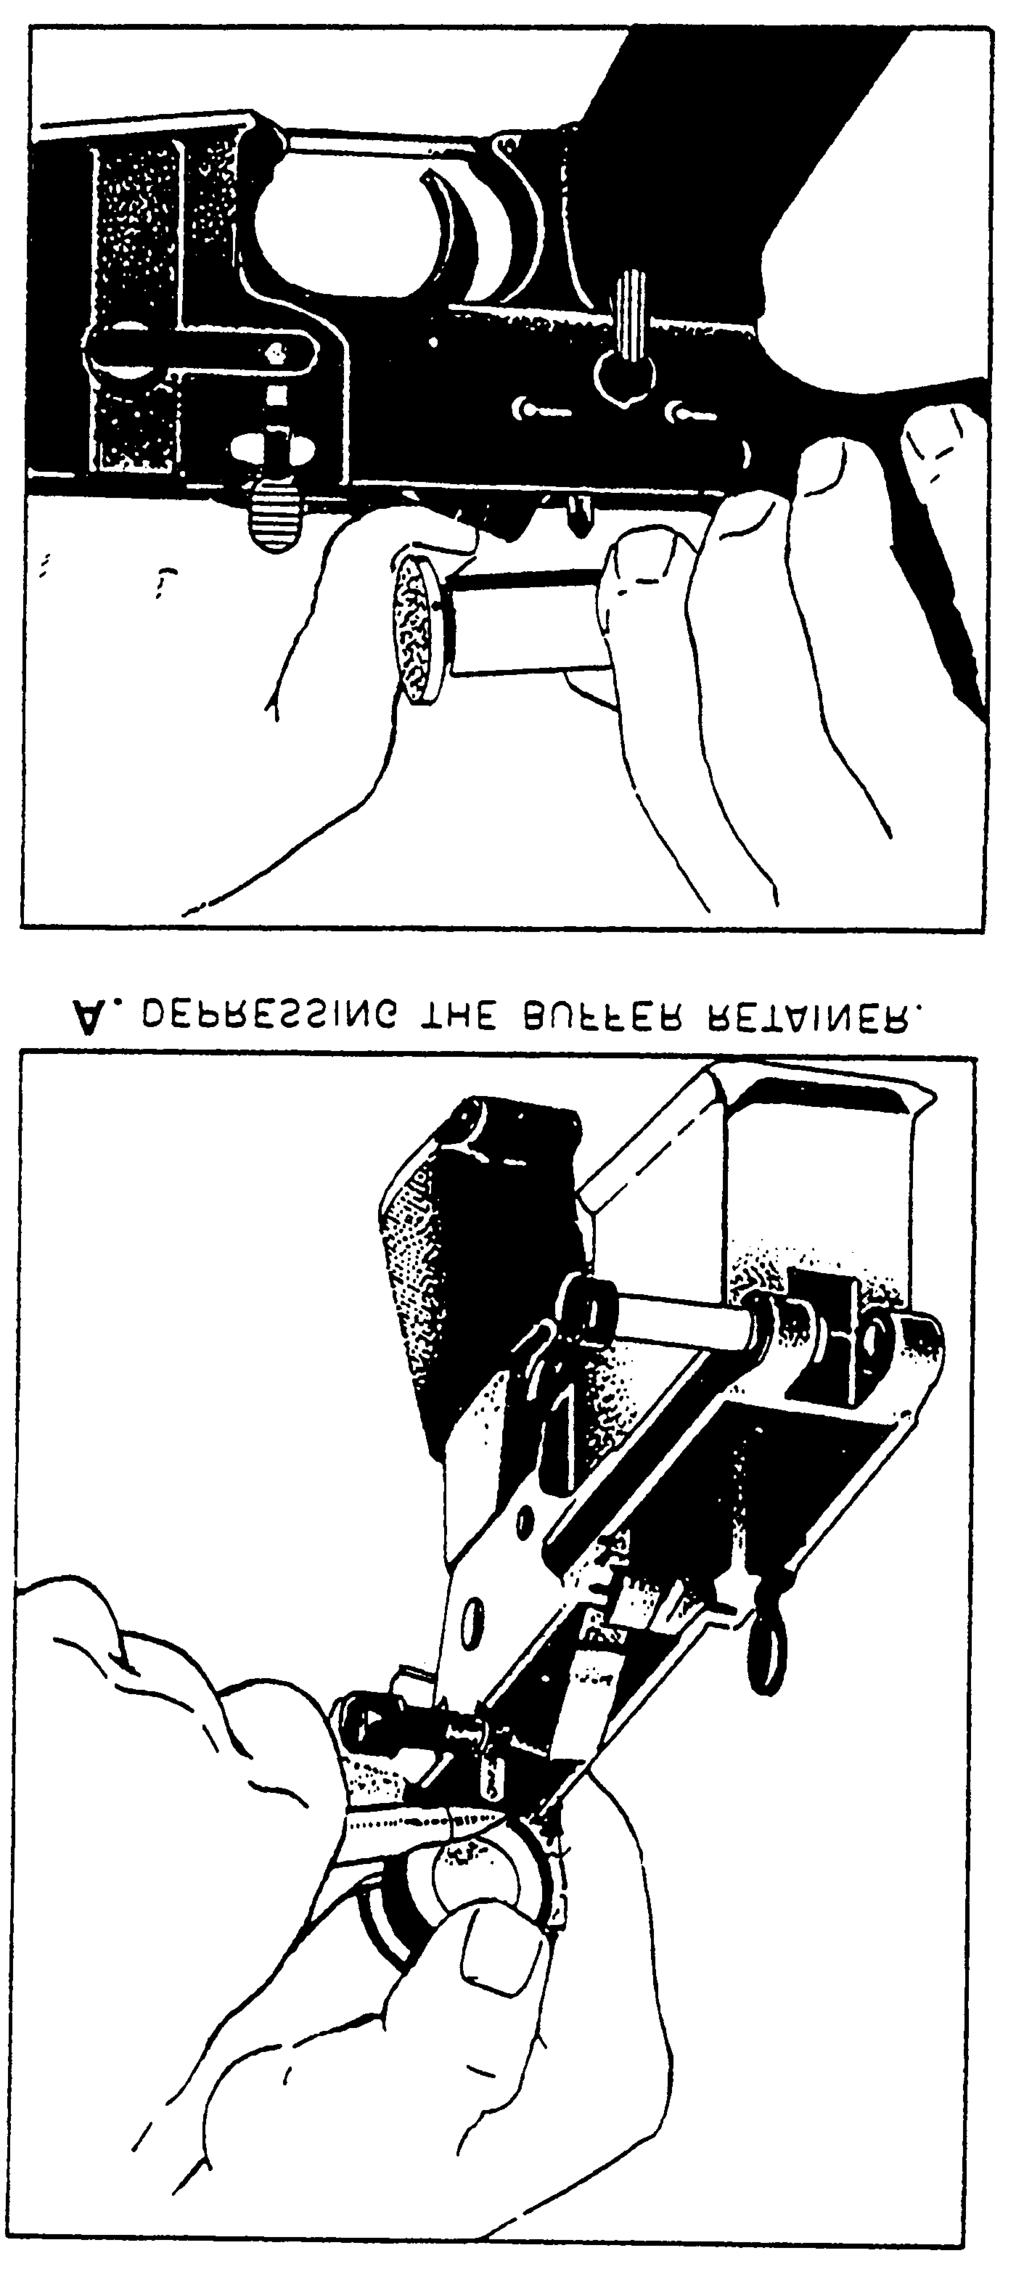 the body of the buffer assembly has cleared the hammer, you can withdraw the action spring from the lower receiver (fig. 3-19, view B).